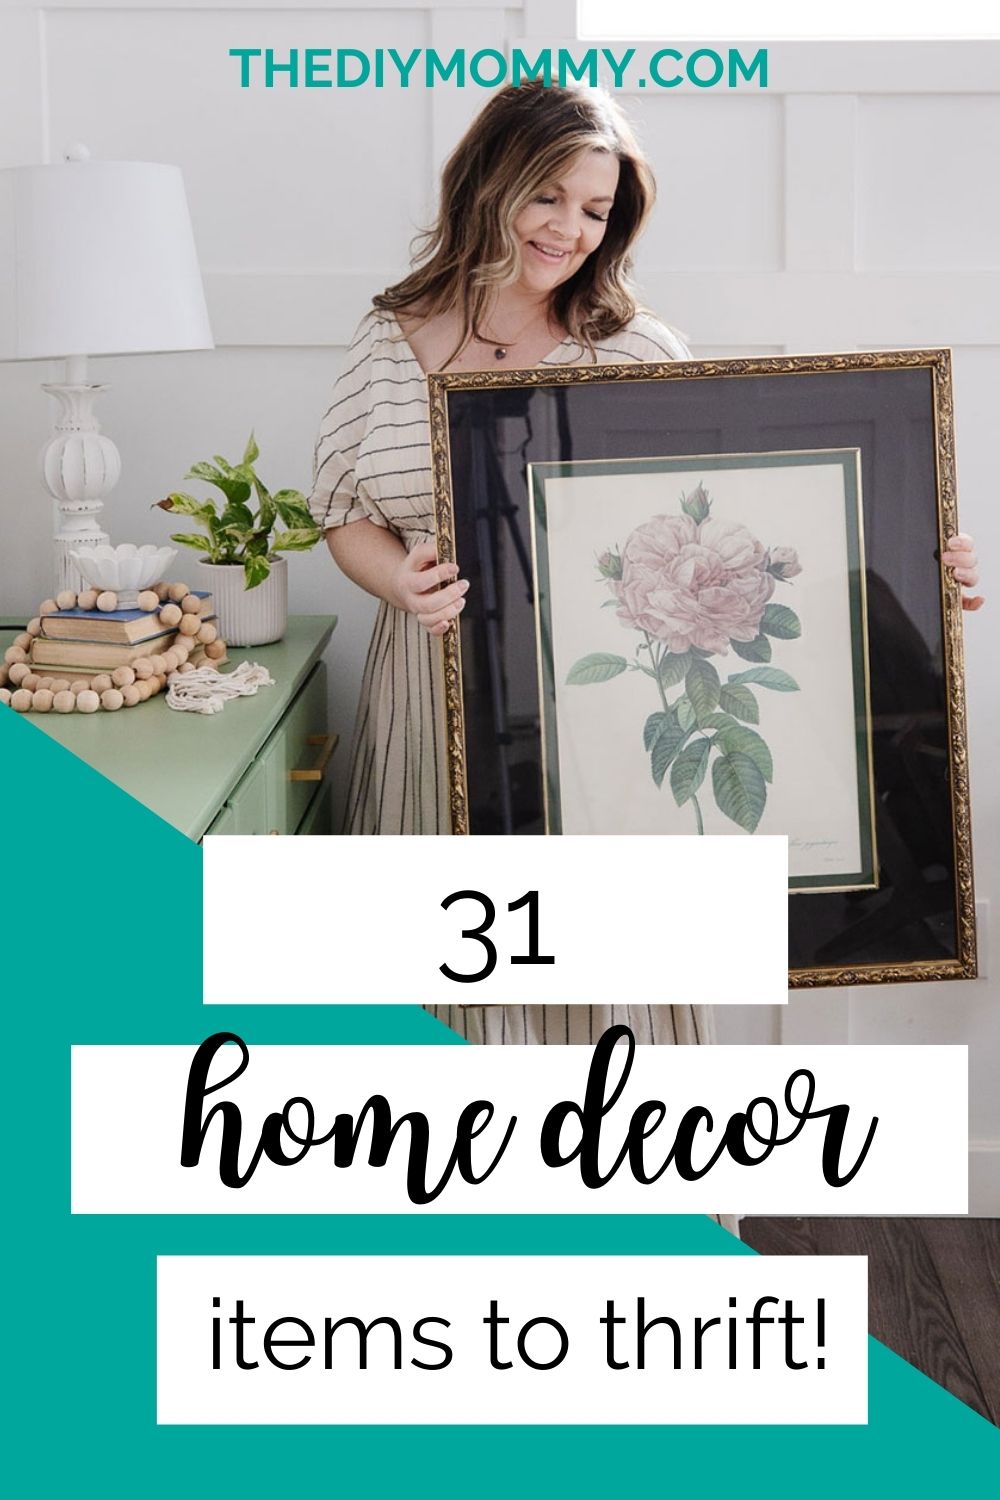 Look for these 31 items for your home next time you're thrifting!